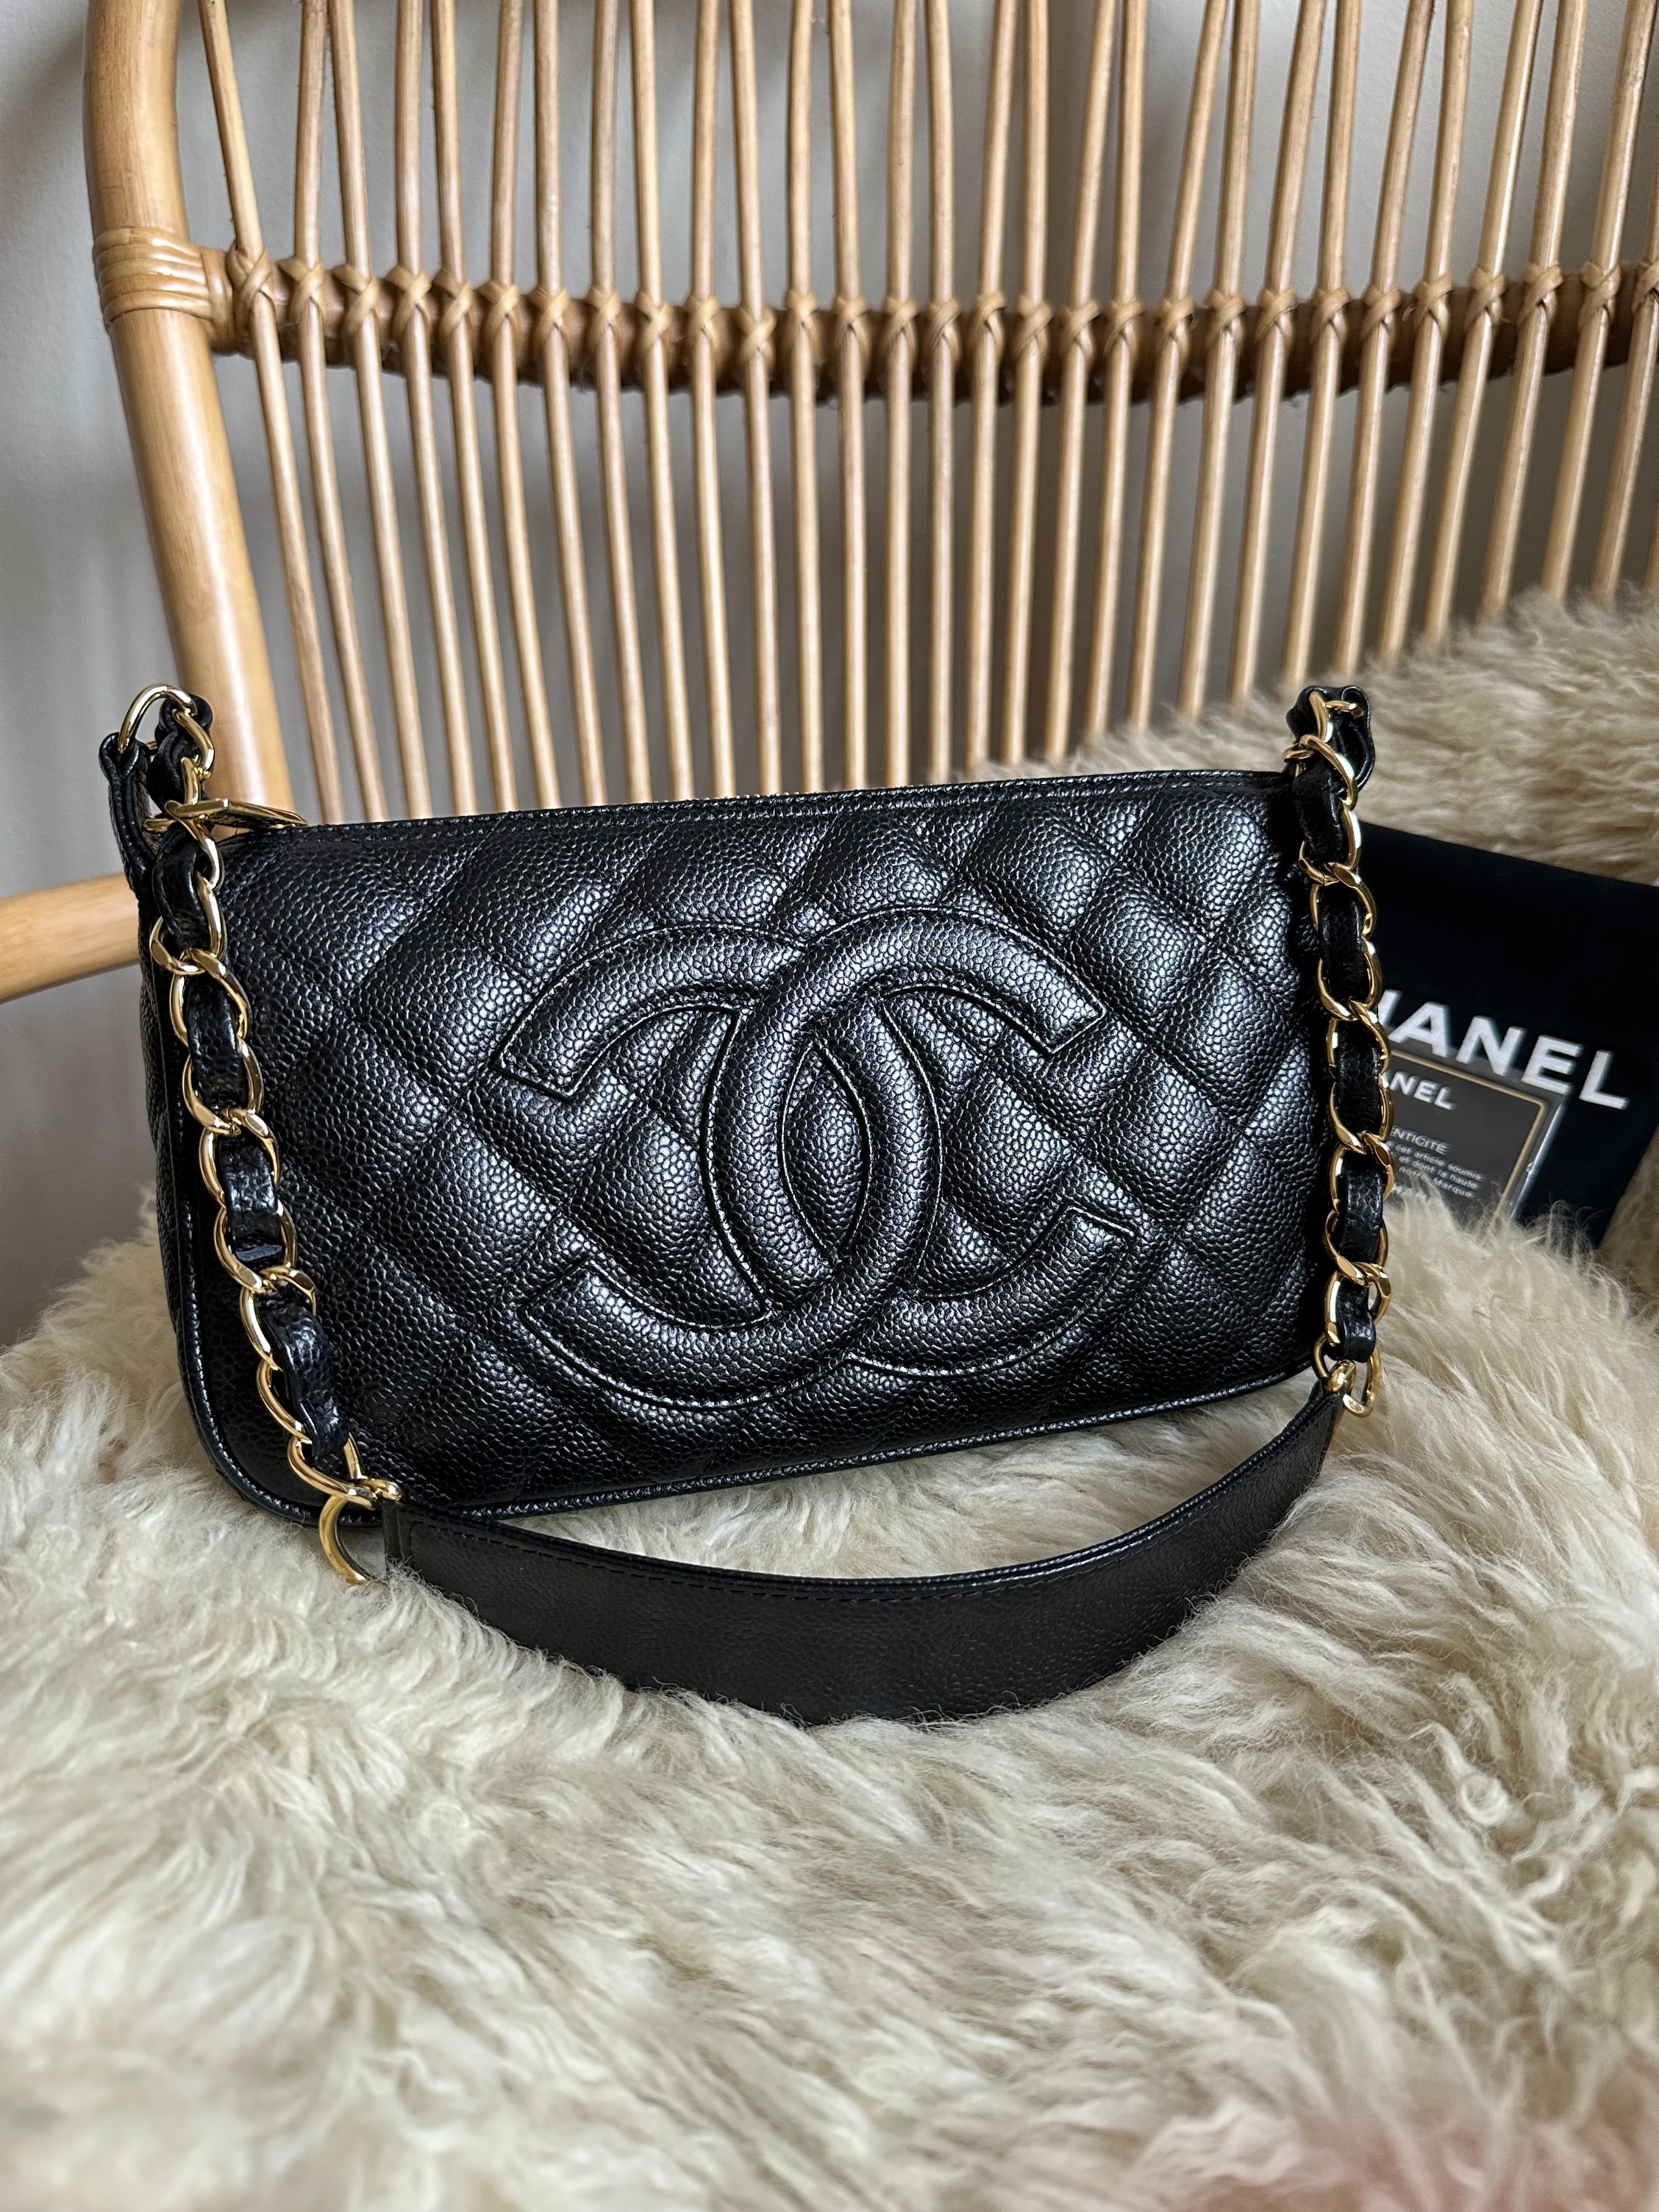 Chanel Black Caviar Leather Quilted Square Mini Crossbody Flap Bag SHW